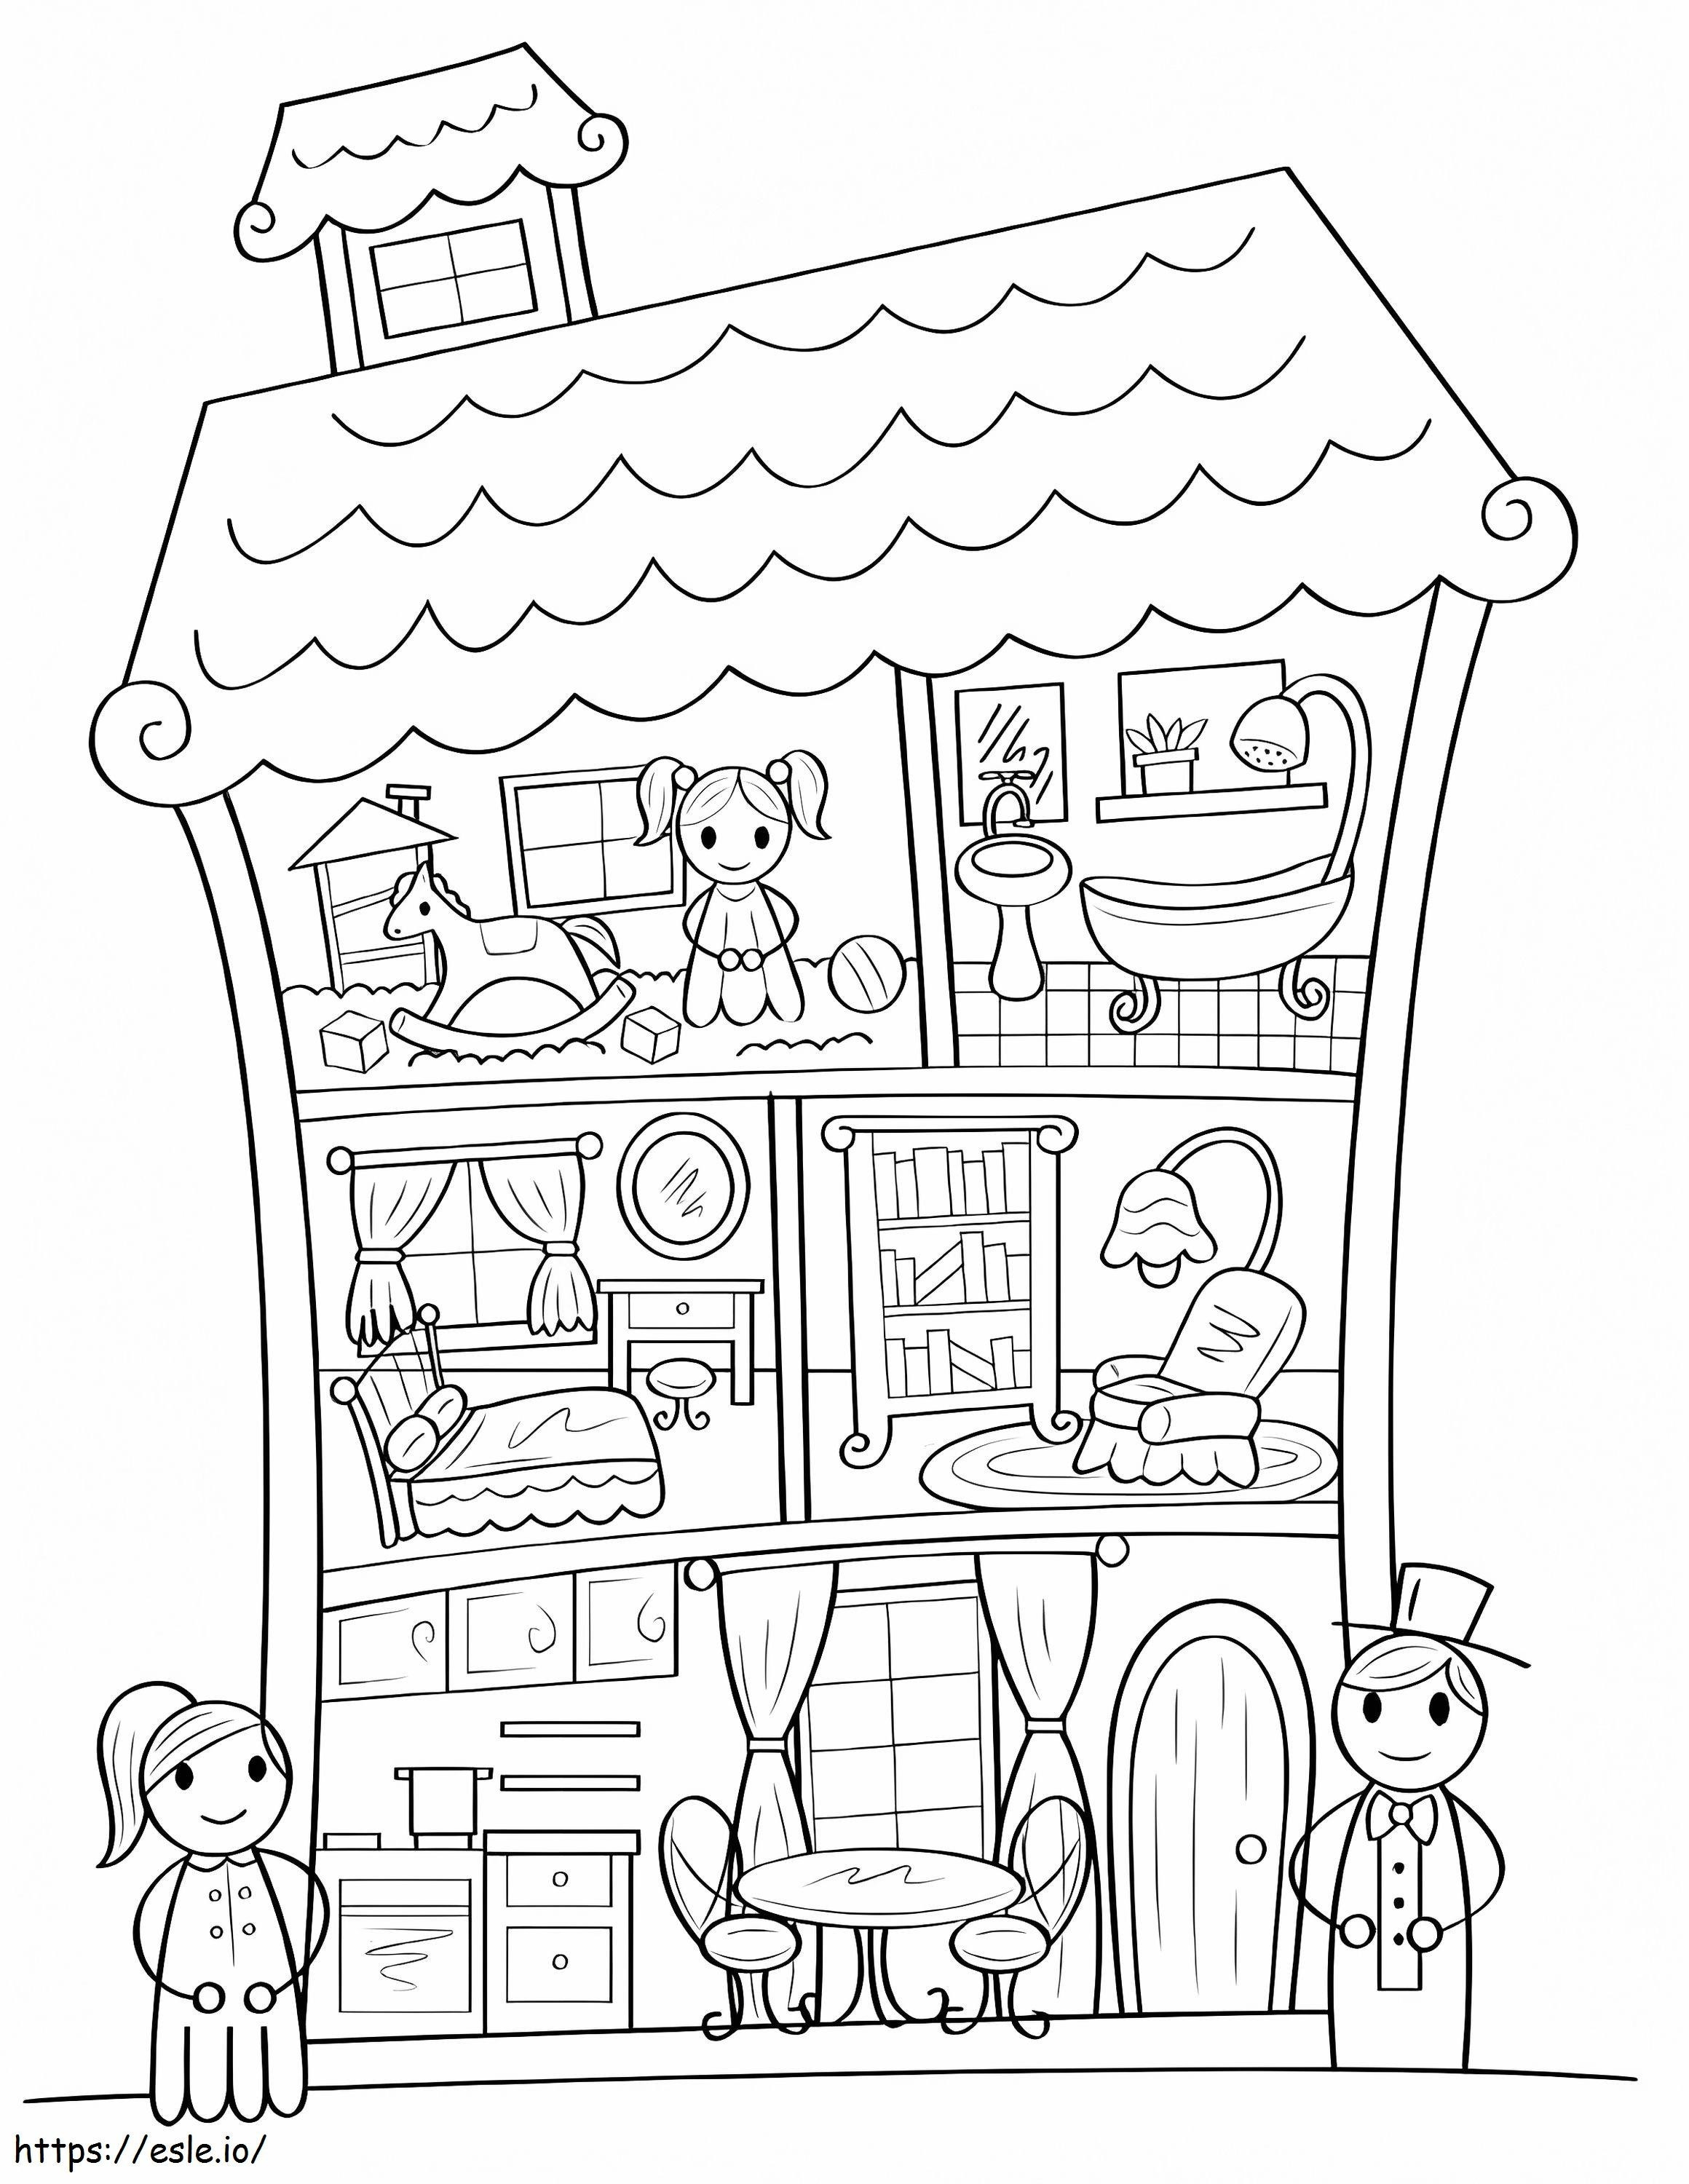 Lovely Dollhouse coloring page